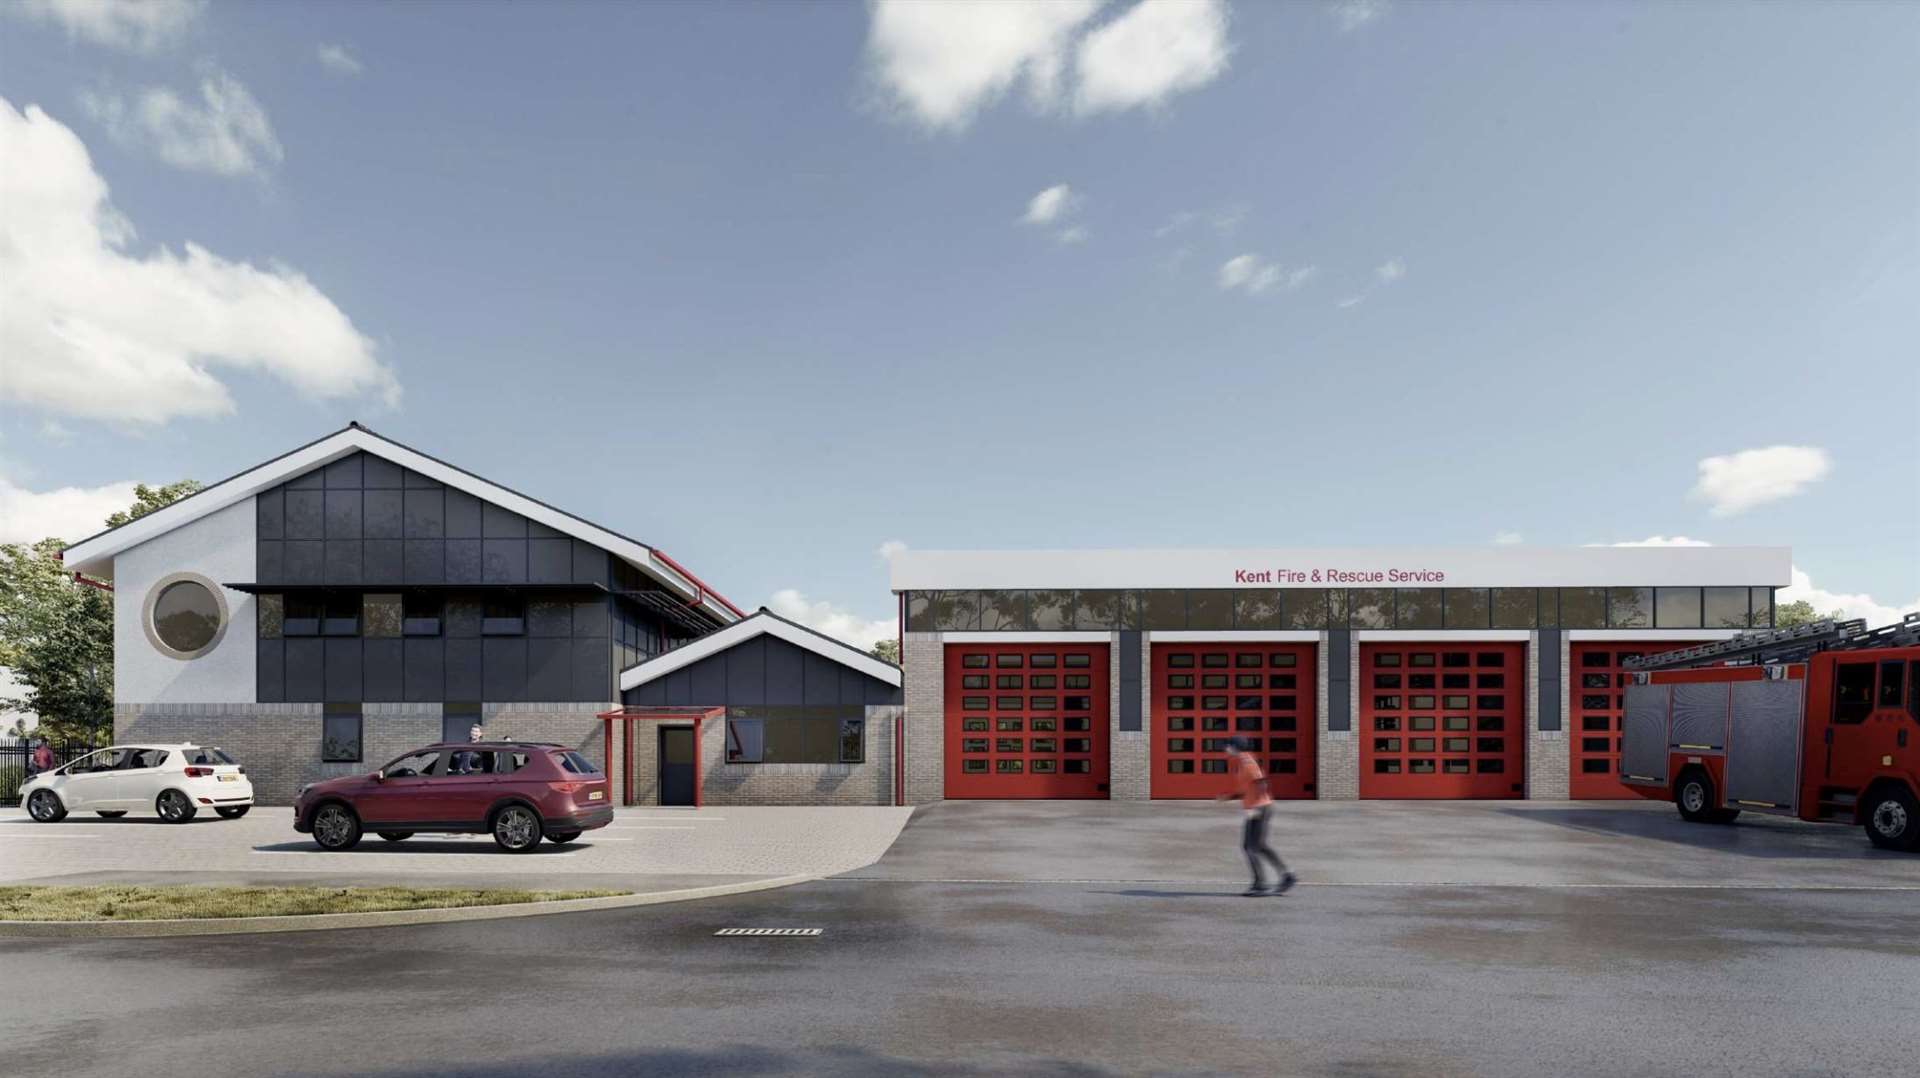 The existing facility will also be upgraded as part of the plan. Picture: Bond Bryan/KFRS